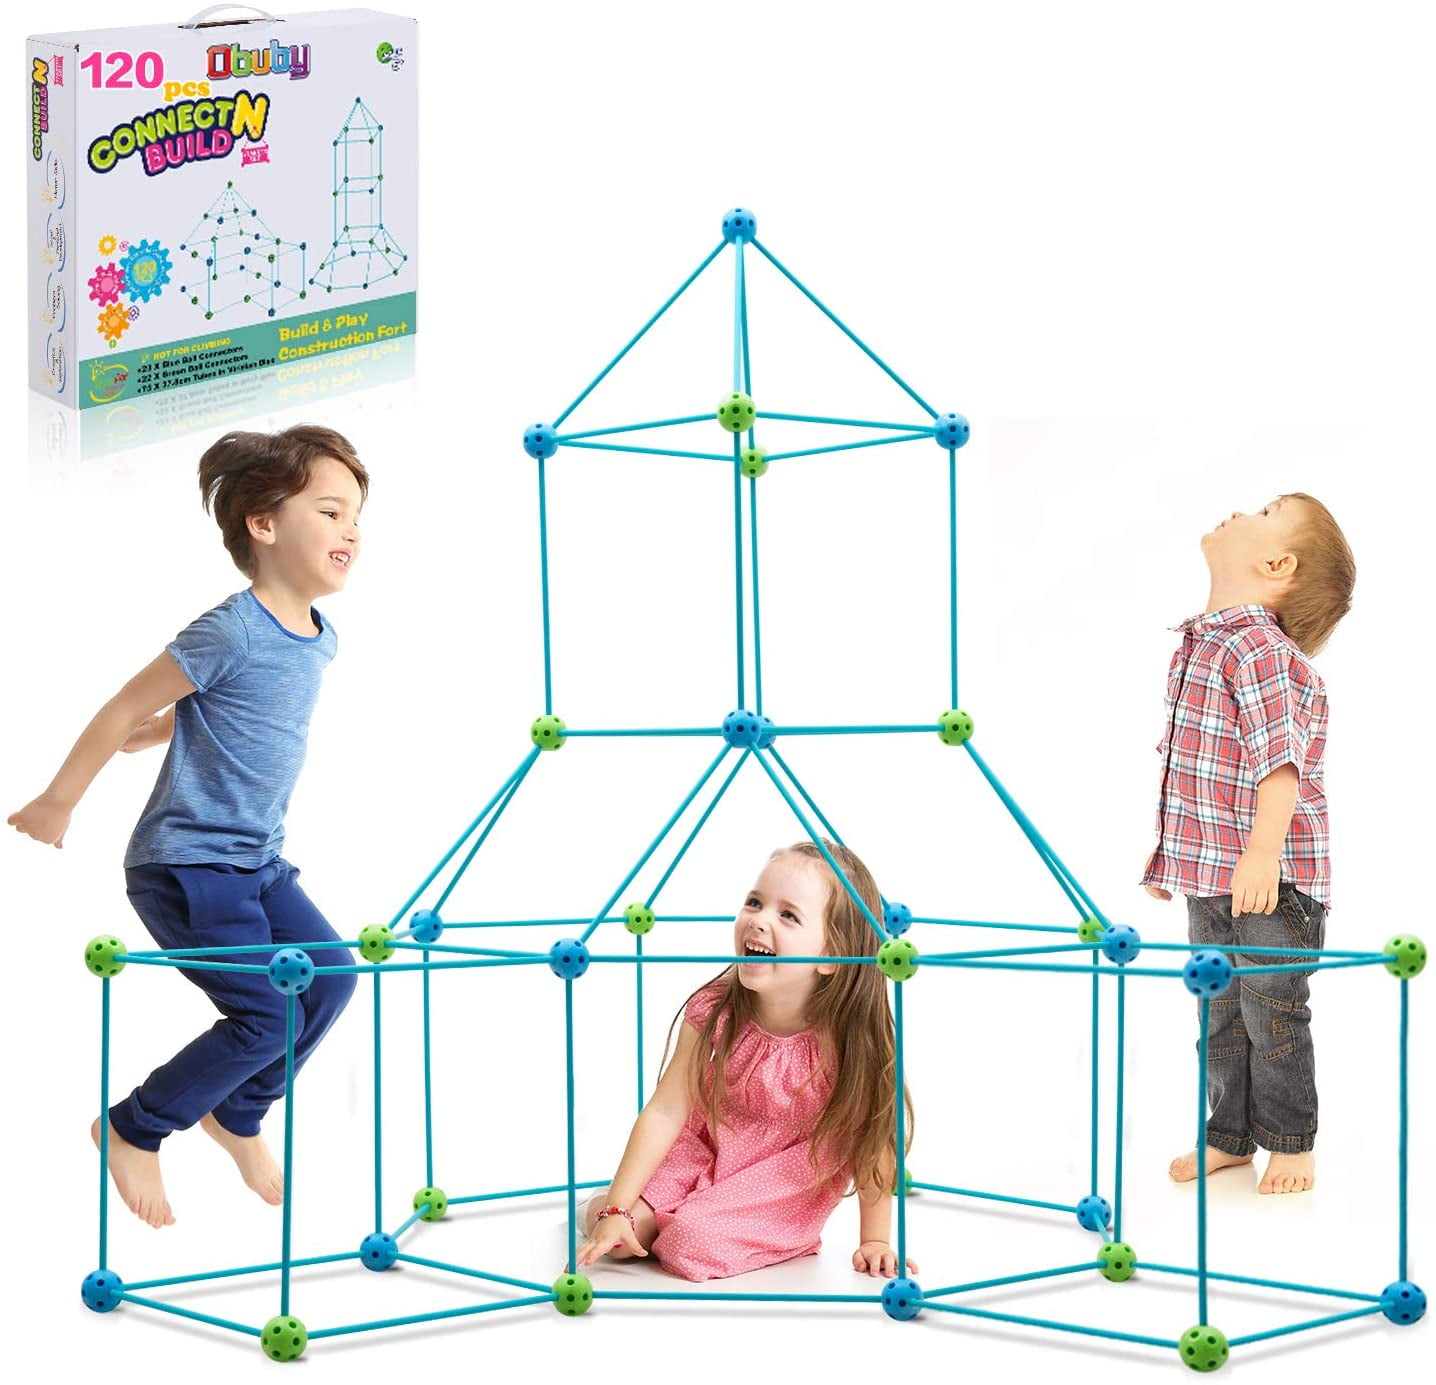 BFUNTOYS Fort Building Kit for Kids Glow in The Dark Tent 200PCS Boys and Girls Play Tunnels Magic Building Castles Rocket Tower Outdoor Creative Forts Construction Builder stem Toys for Indoor 